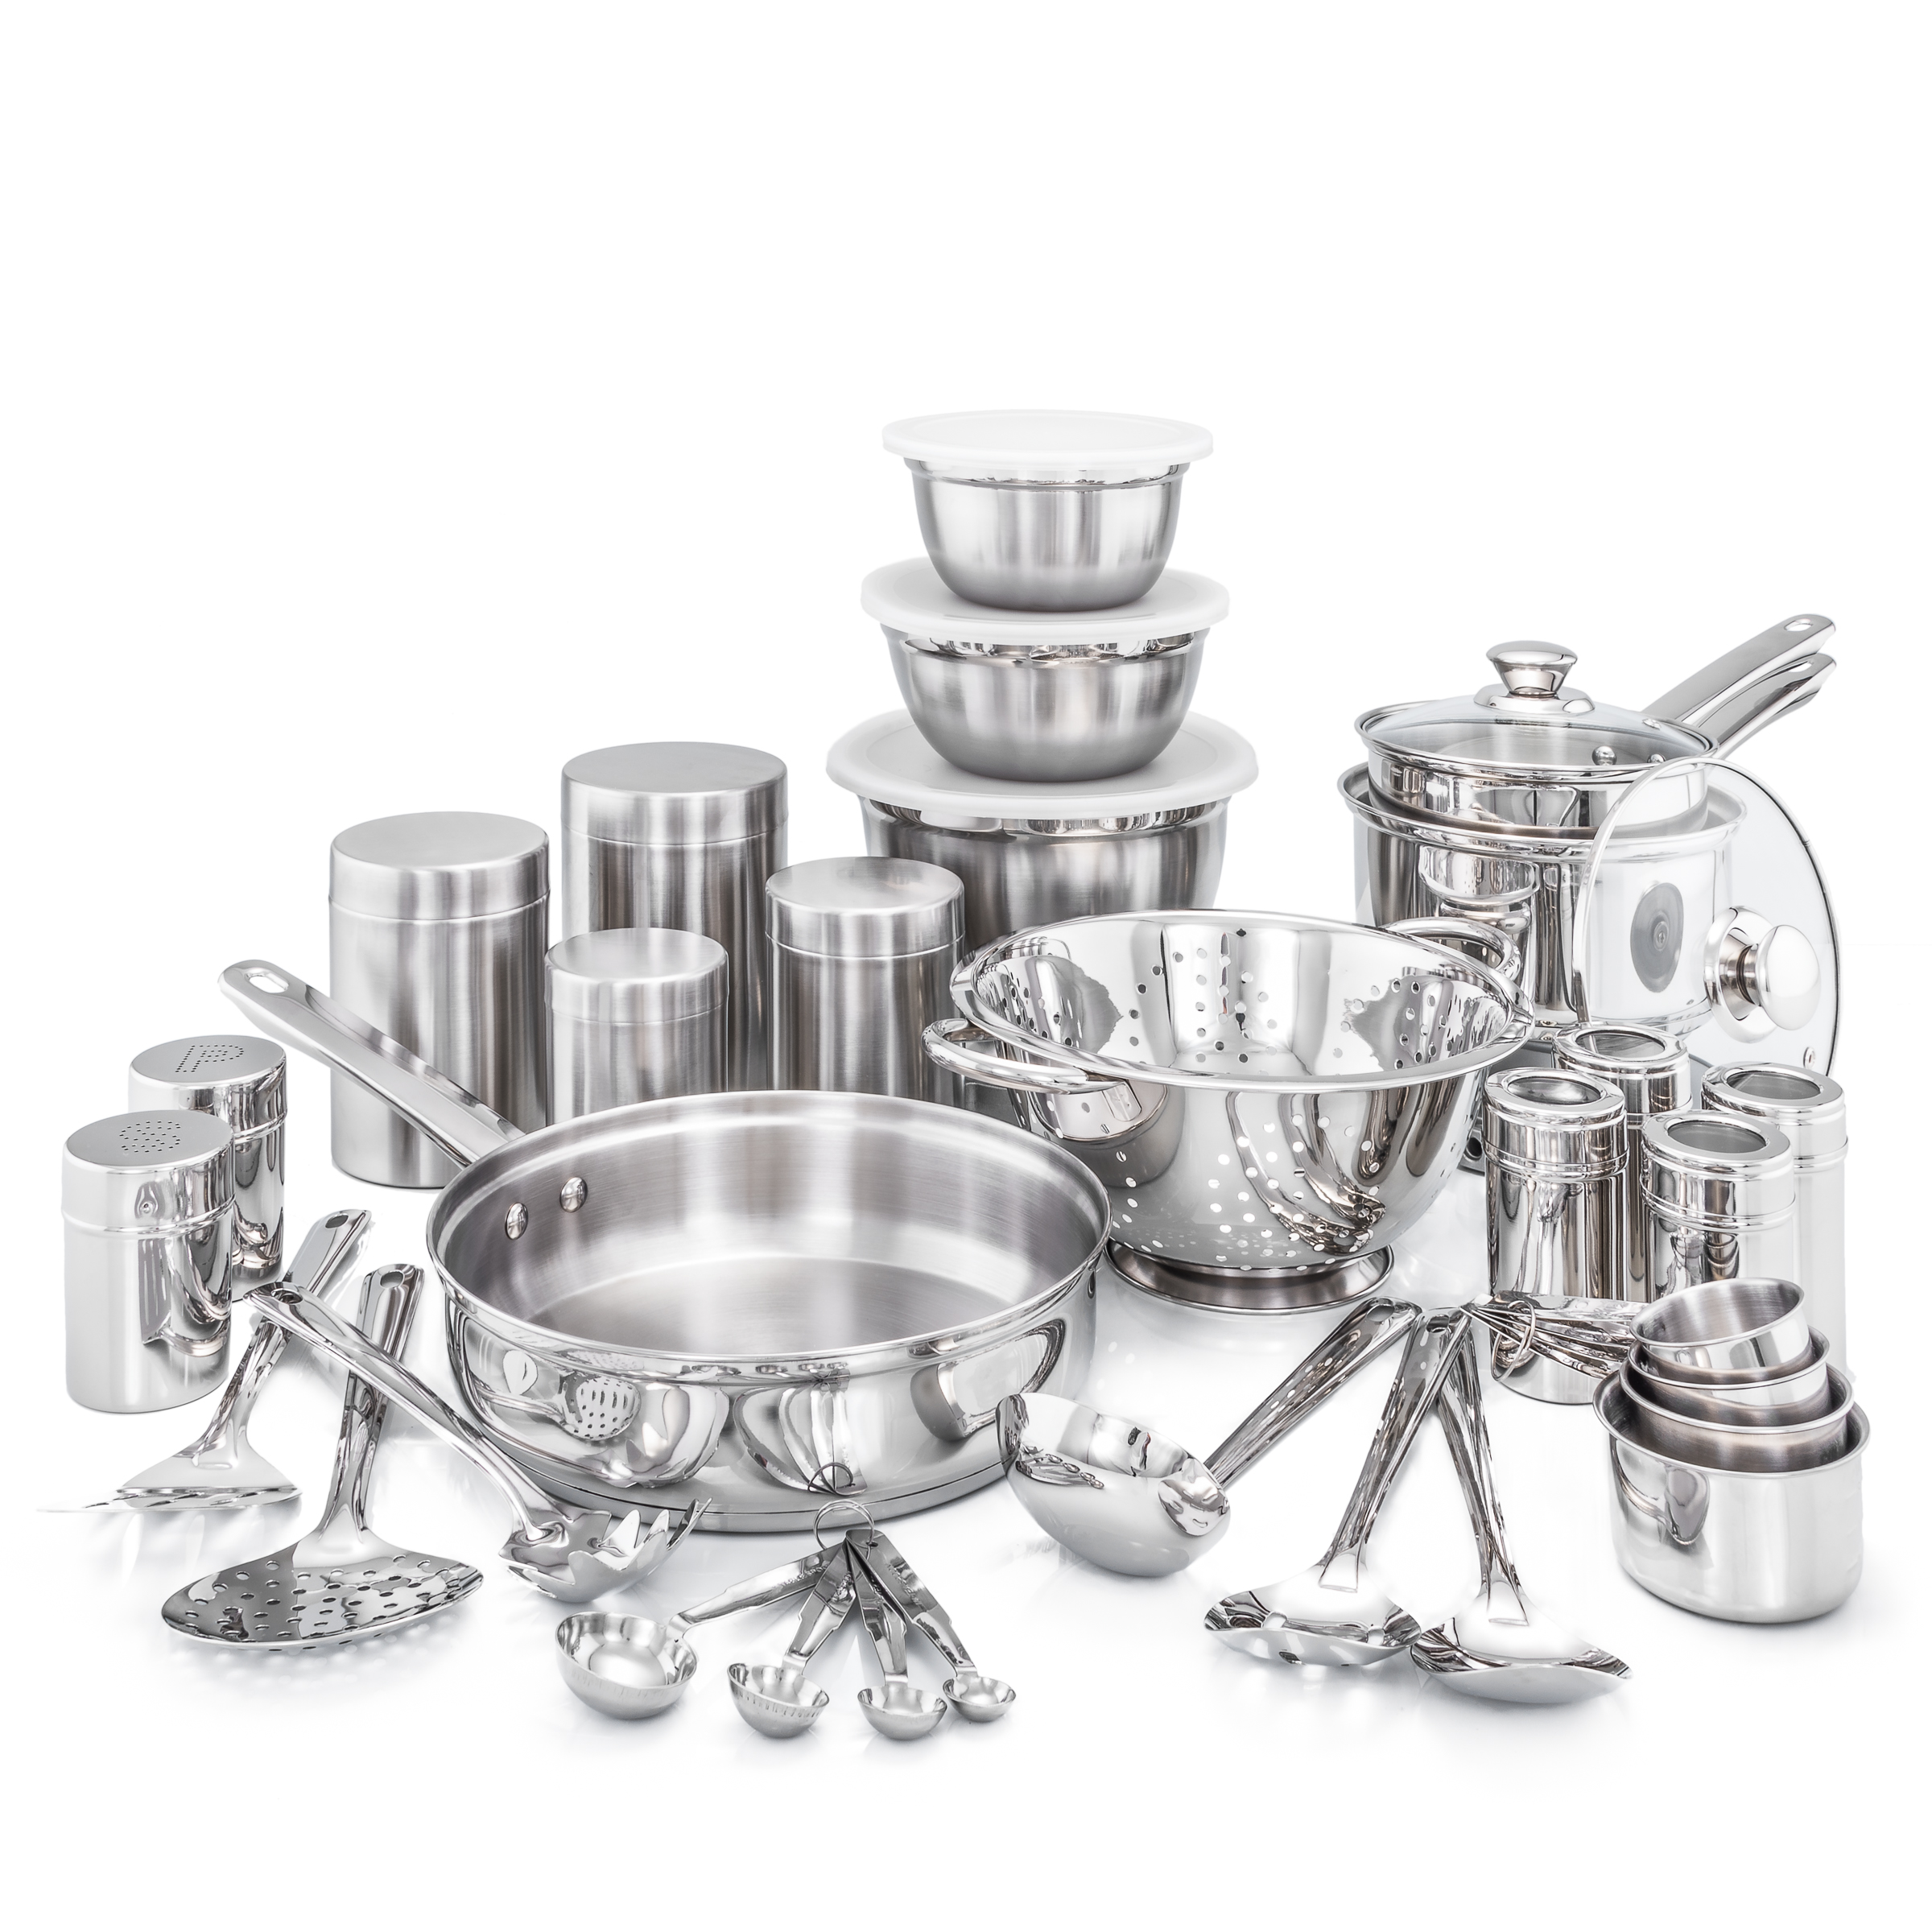 Old Dutch Interntational 36 Pc. "Kitchen in a Box" Stainless Steel Cookware Set